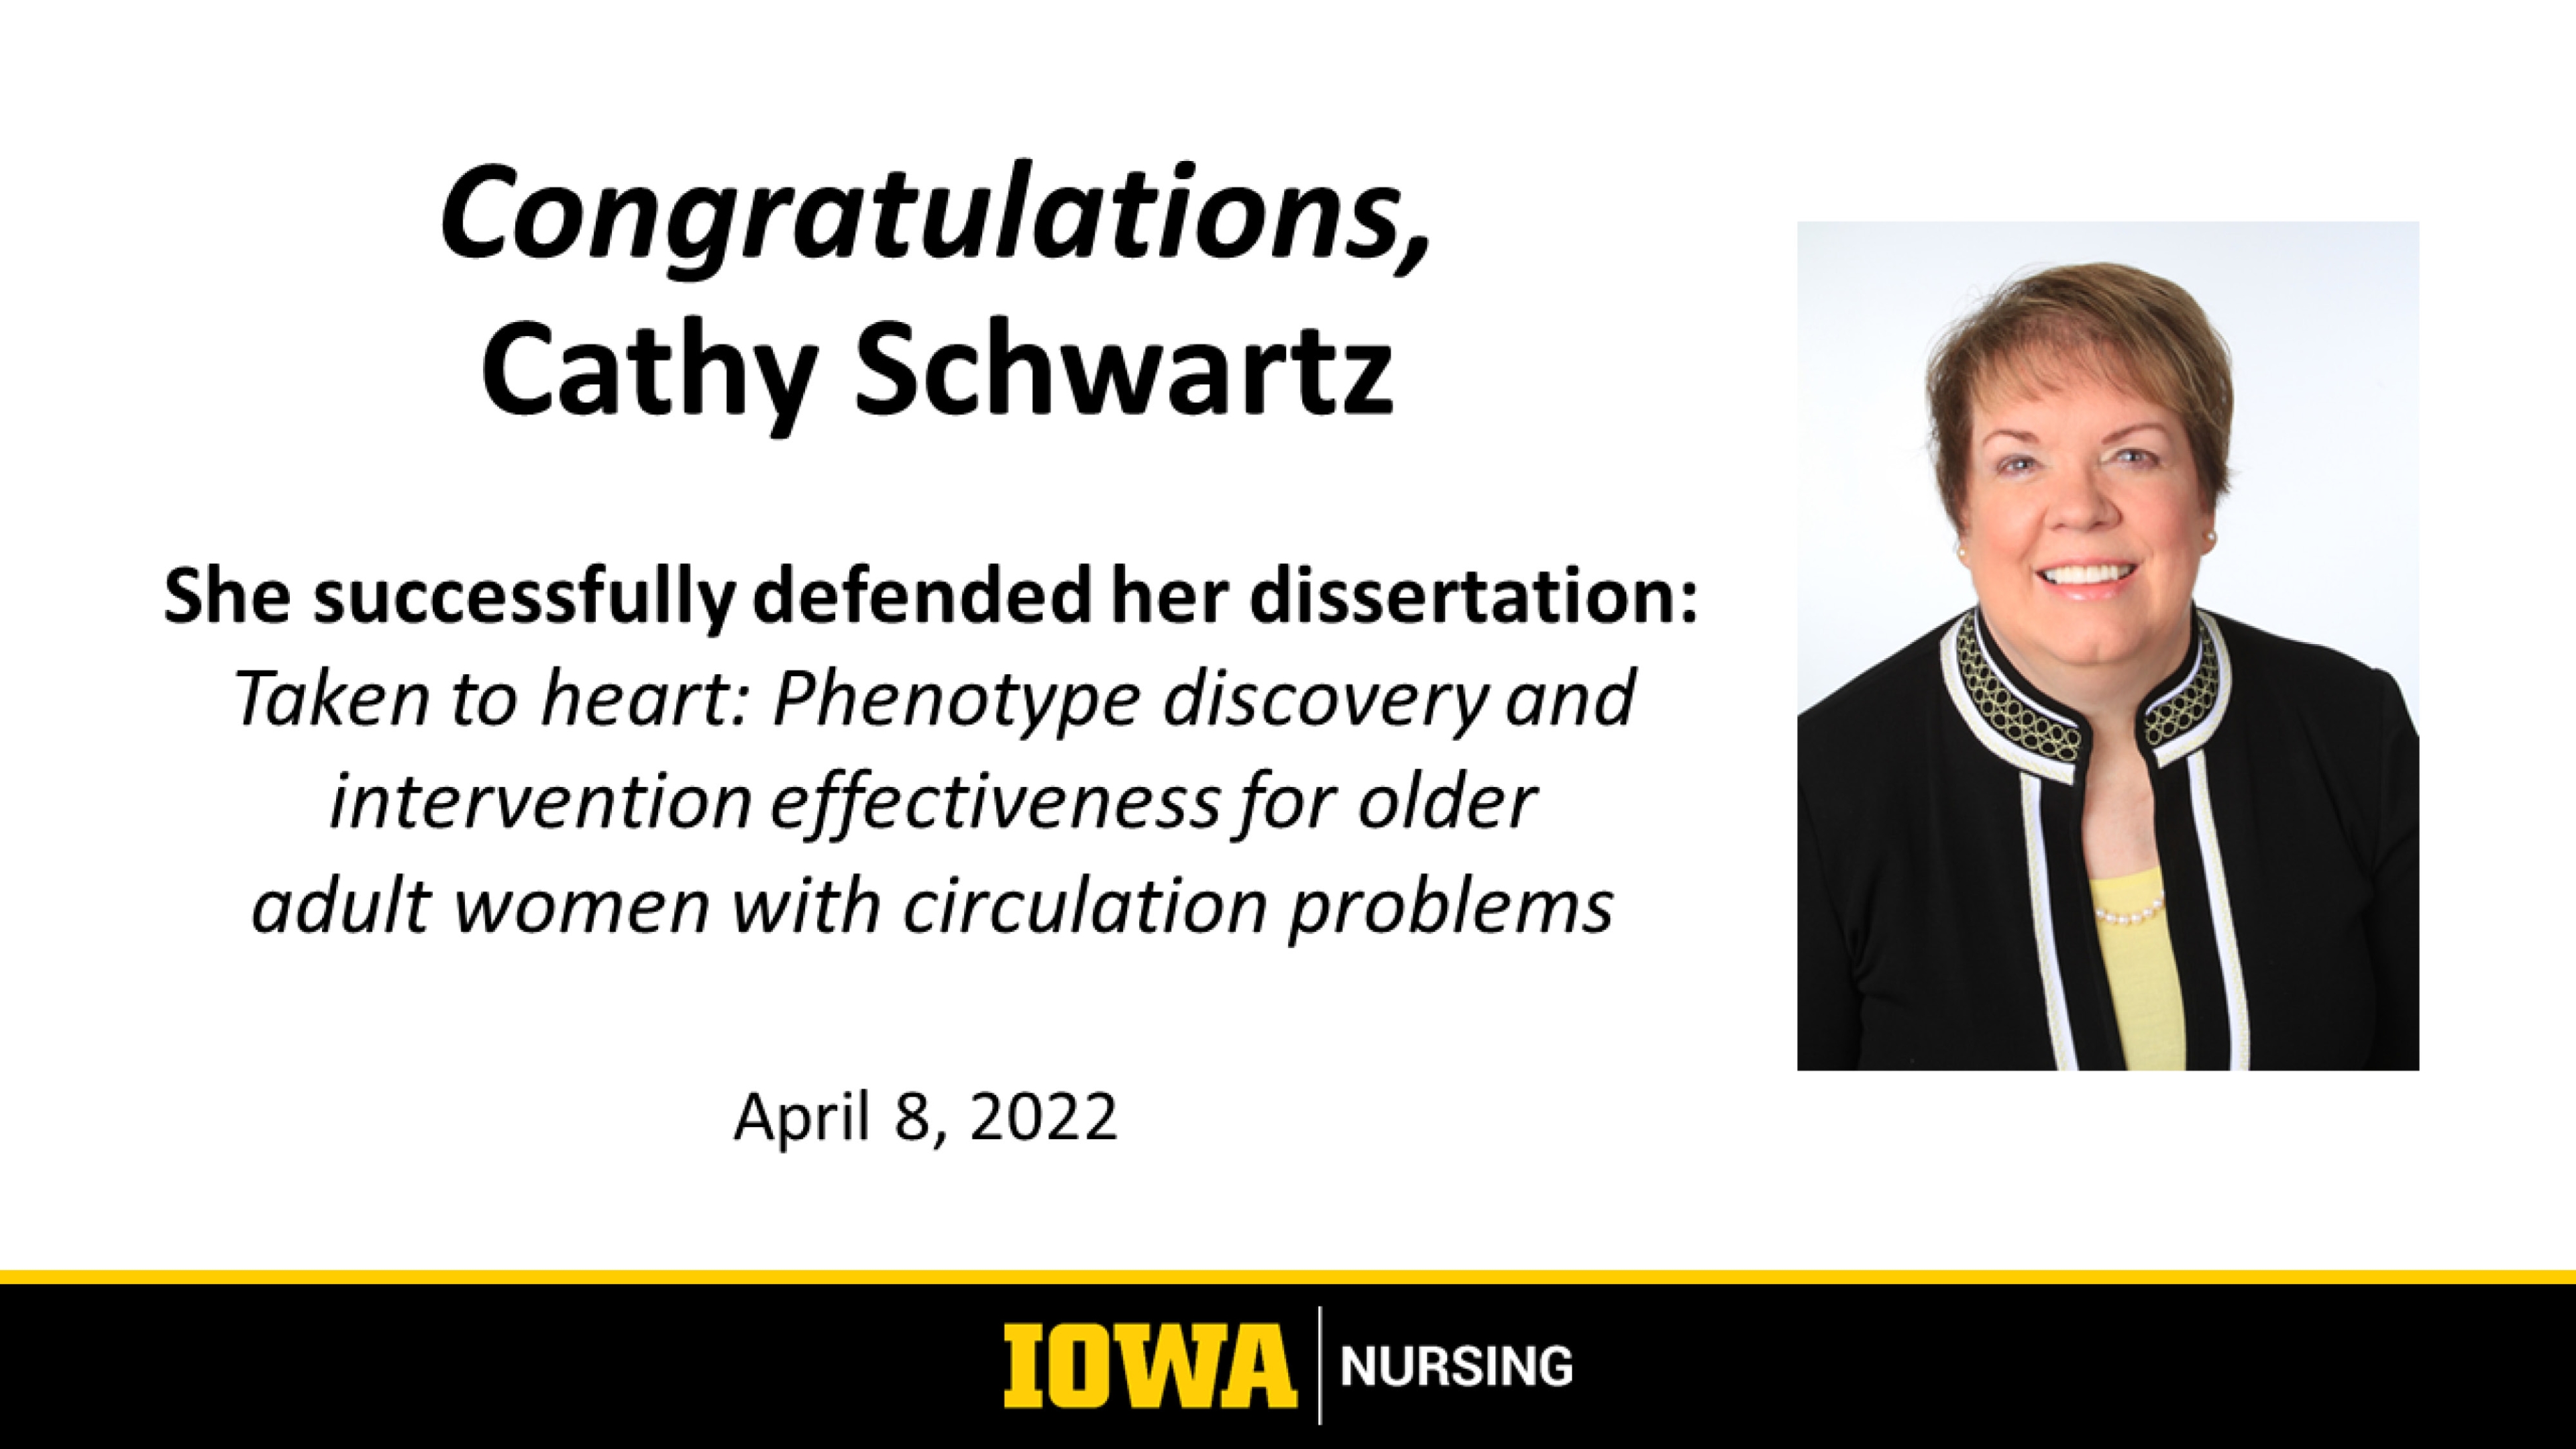 Congratulations to Cathy Schwartz for successful defense of her dissertation. 